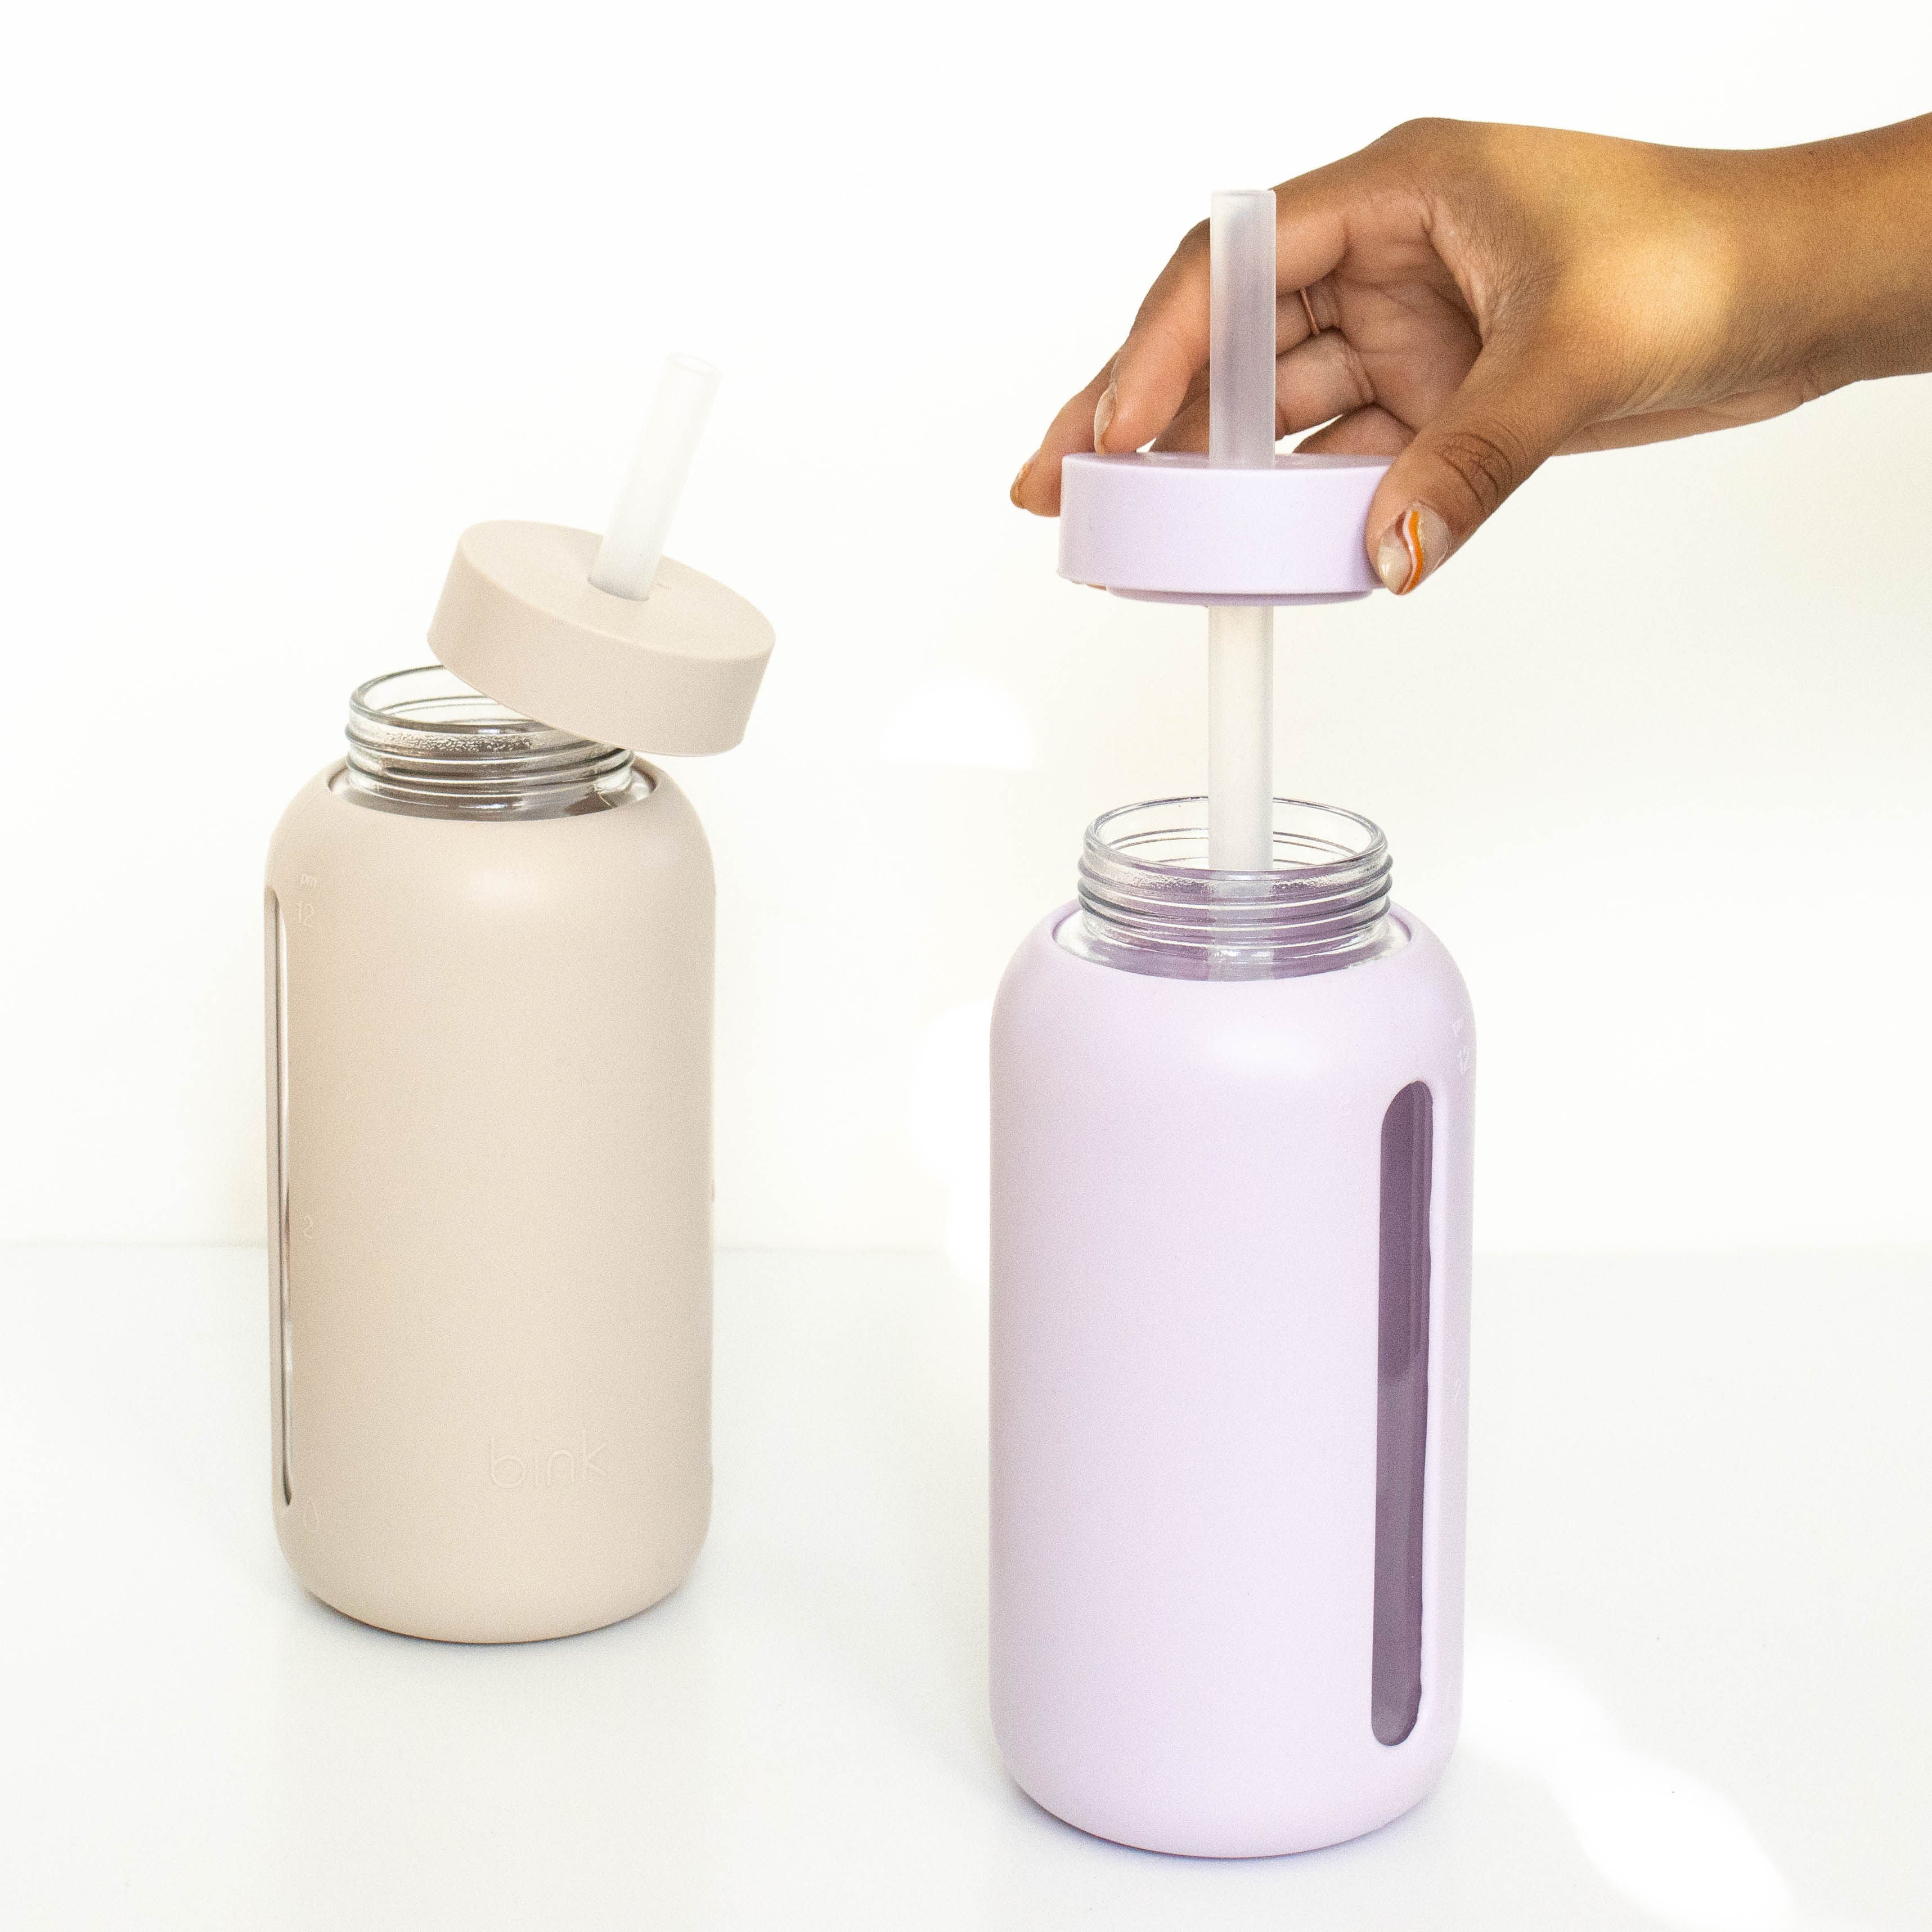 DAY BOTTLE | The Hydration Tracking Water Bottle | 27oz (800ml) | Lilac